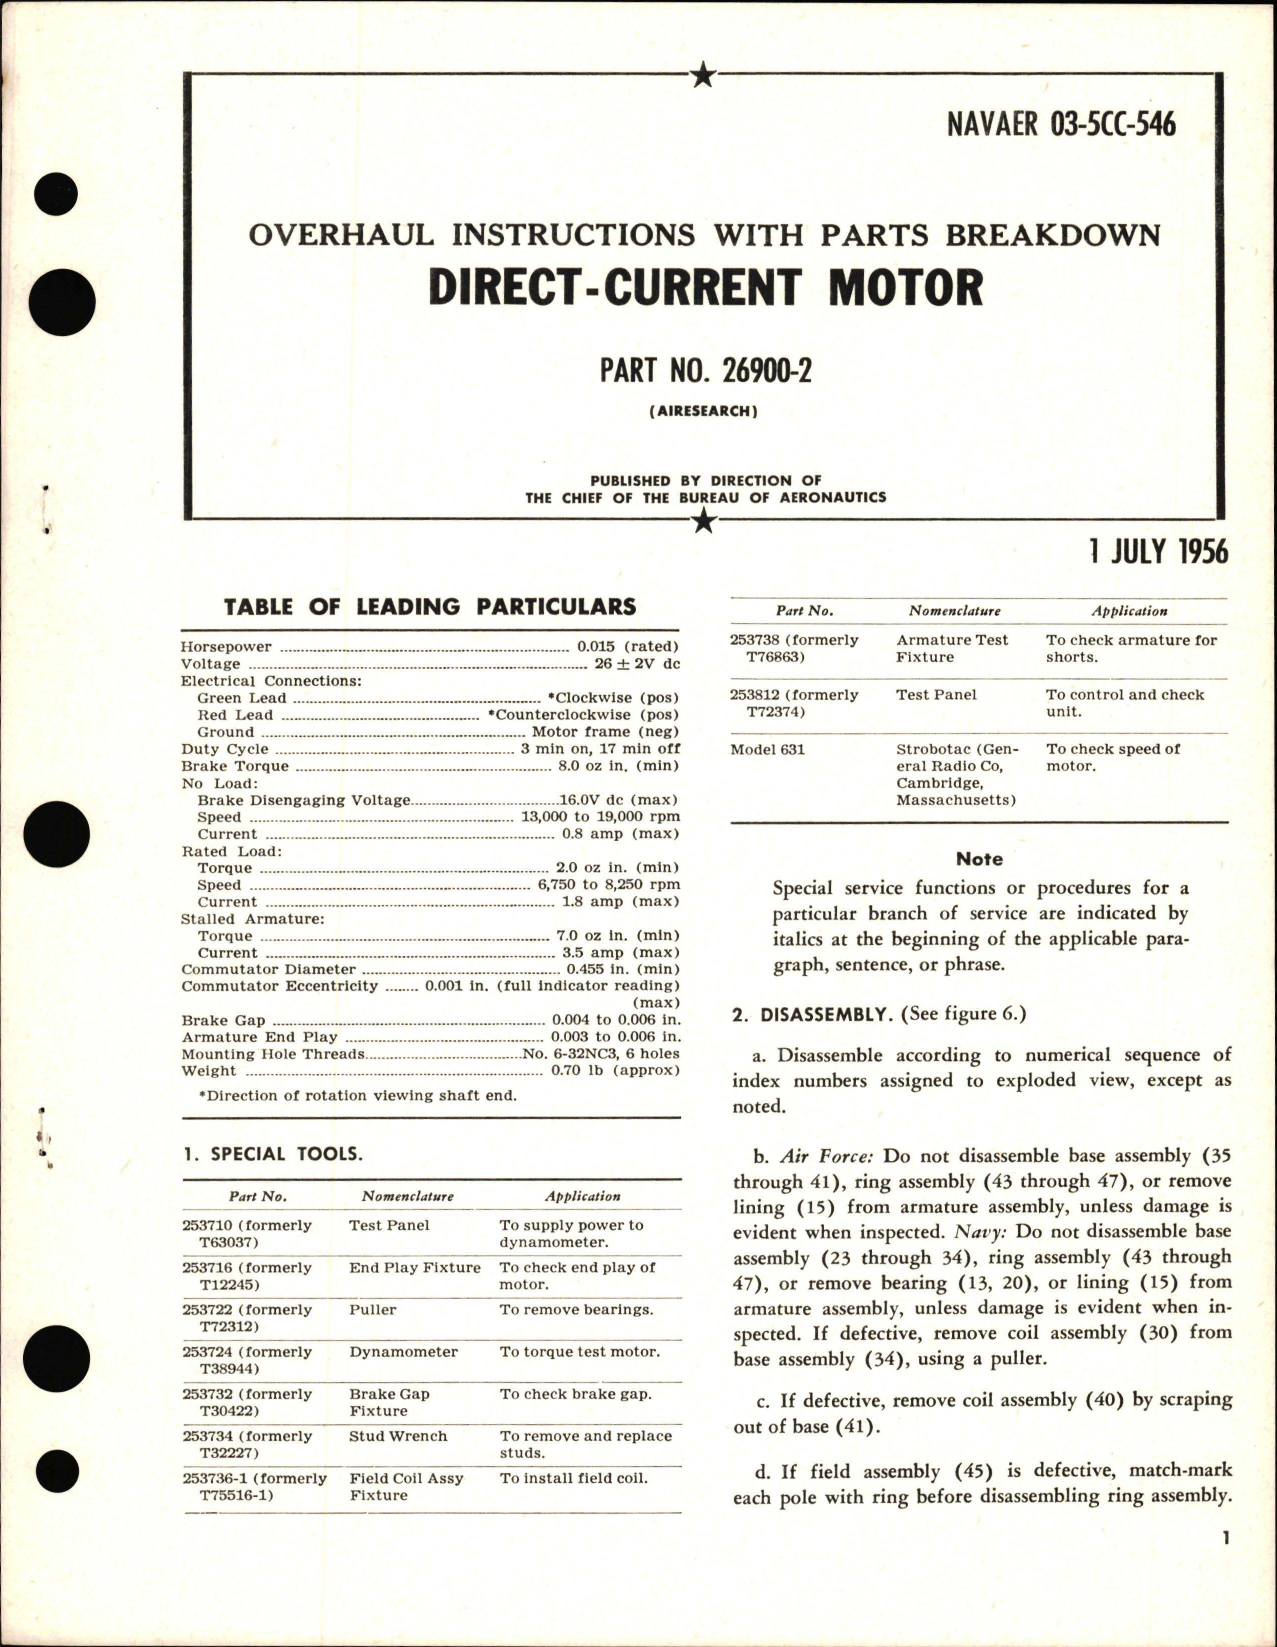 Sample page 1 from AirCorps Library document: Overhaul Instructions with Parts Breakdown for Direct Current Motor - Part 26900-2 